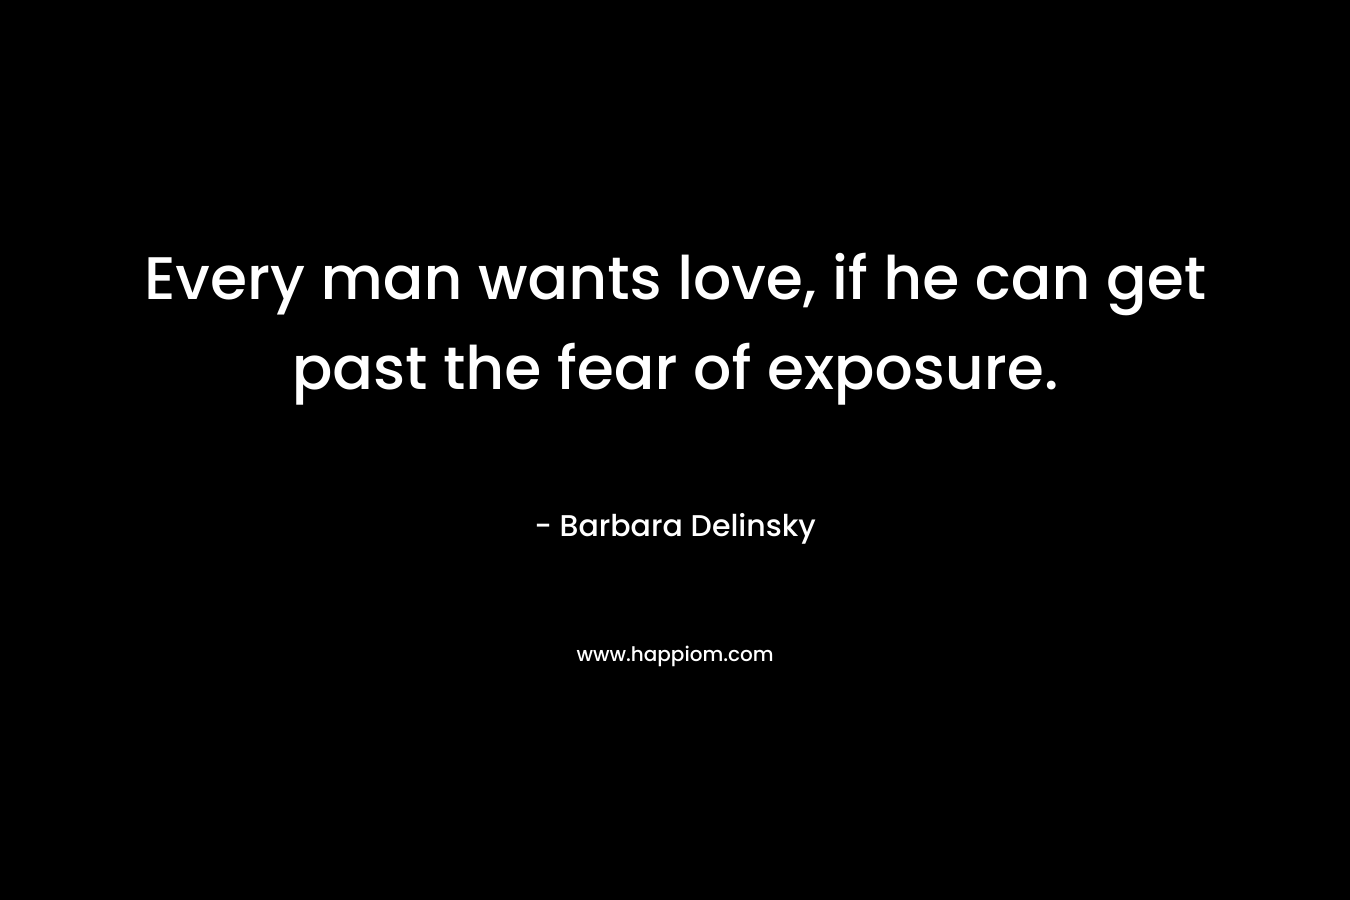 Every man wants love, if he can get past the fear of exposure.